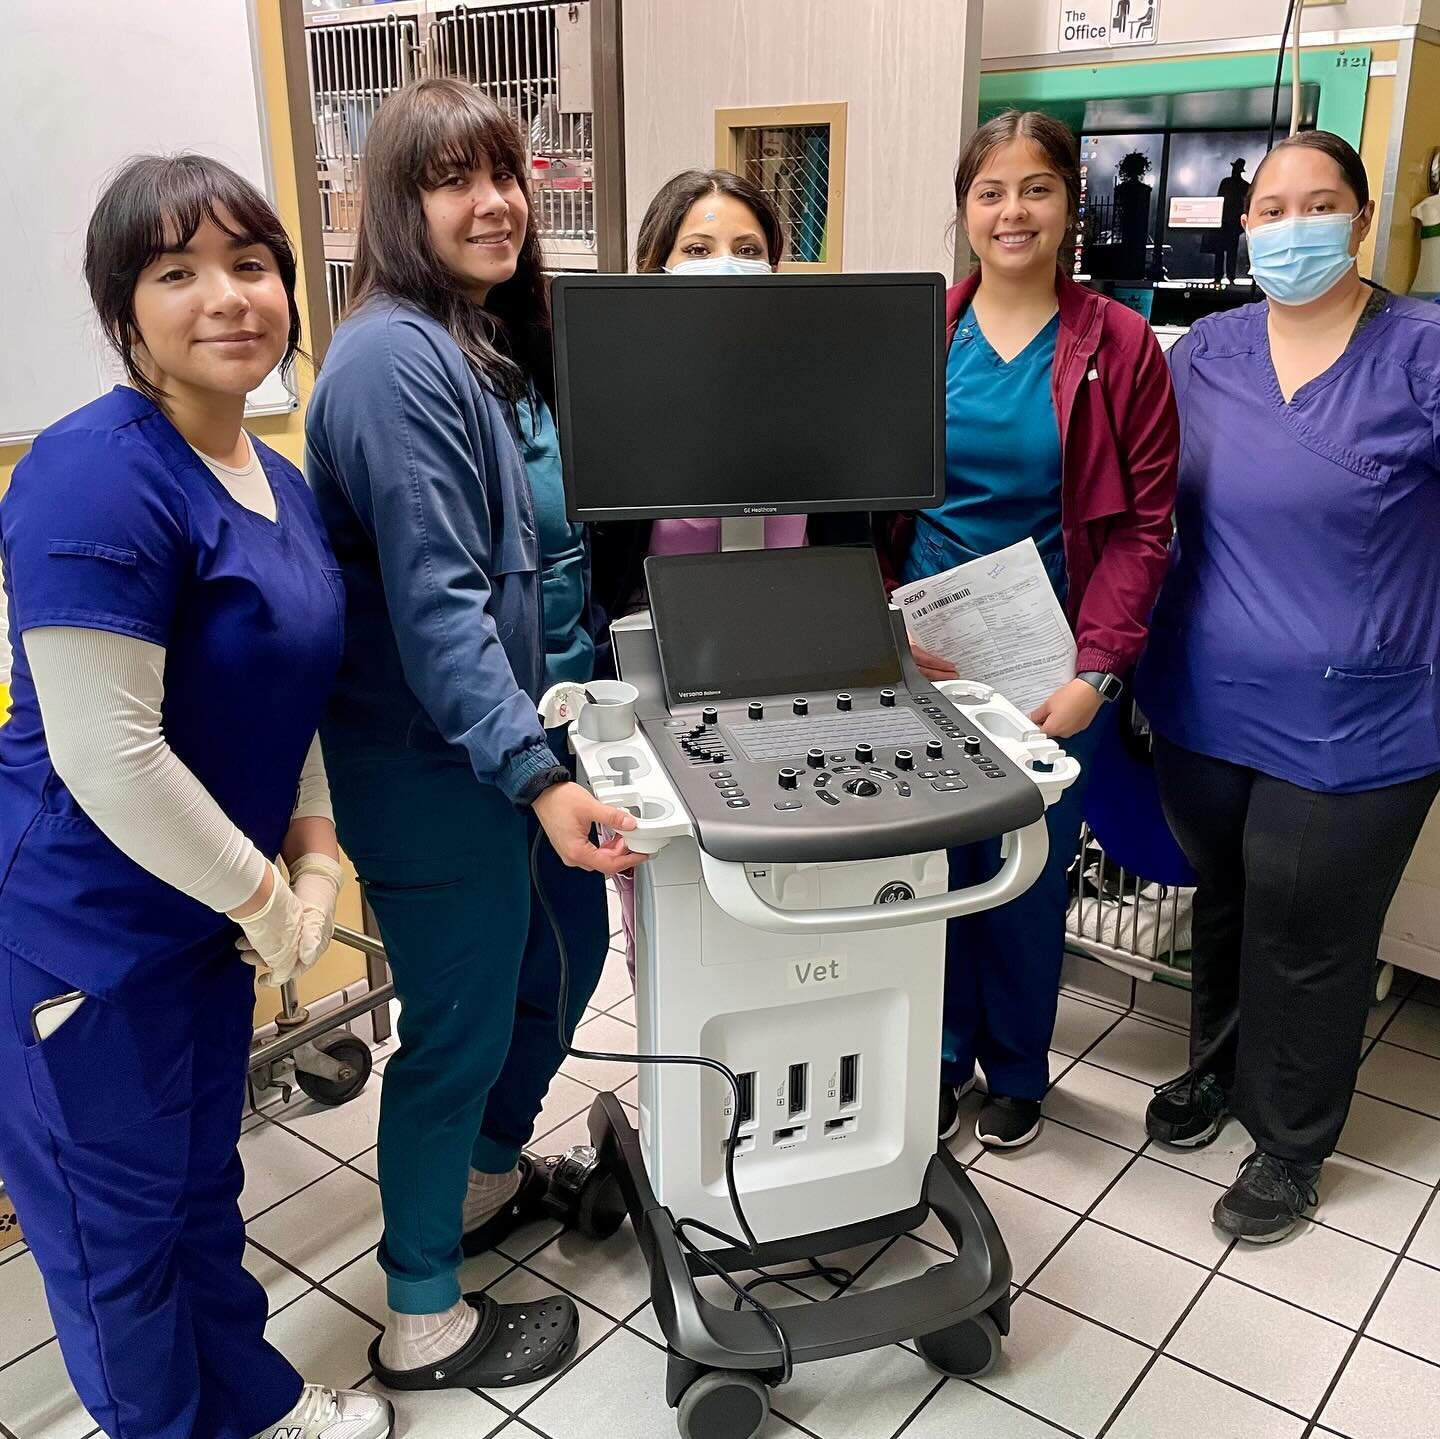 We got a new ultrasound machine at GSAH! Ultrasounds help diagnose pregnancy, tumors, blockages and help locate them as well! Ultrasounds can pick up information better than x-rays. It is a non-invasive machine and it is extremely helpful in monitori